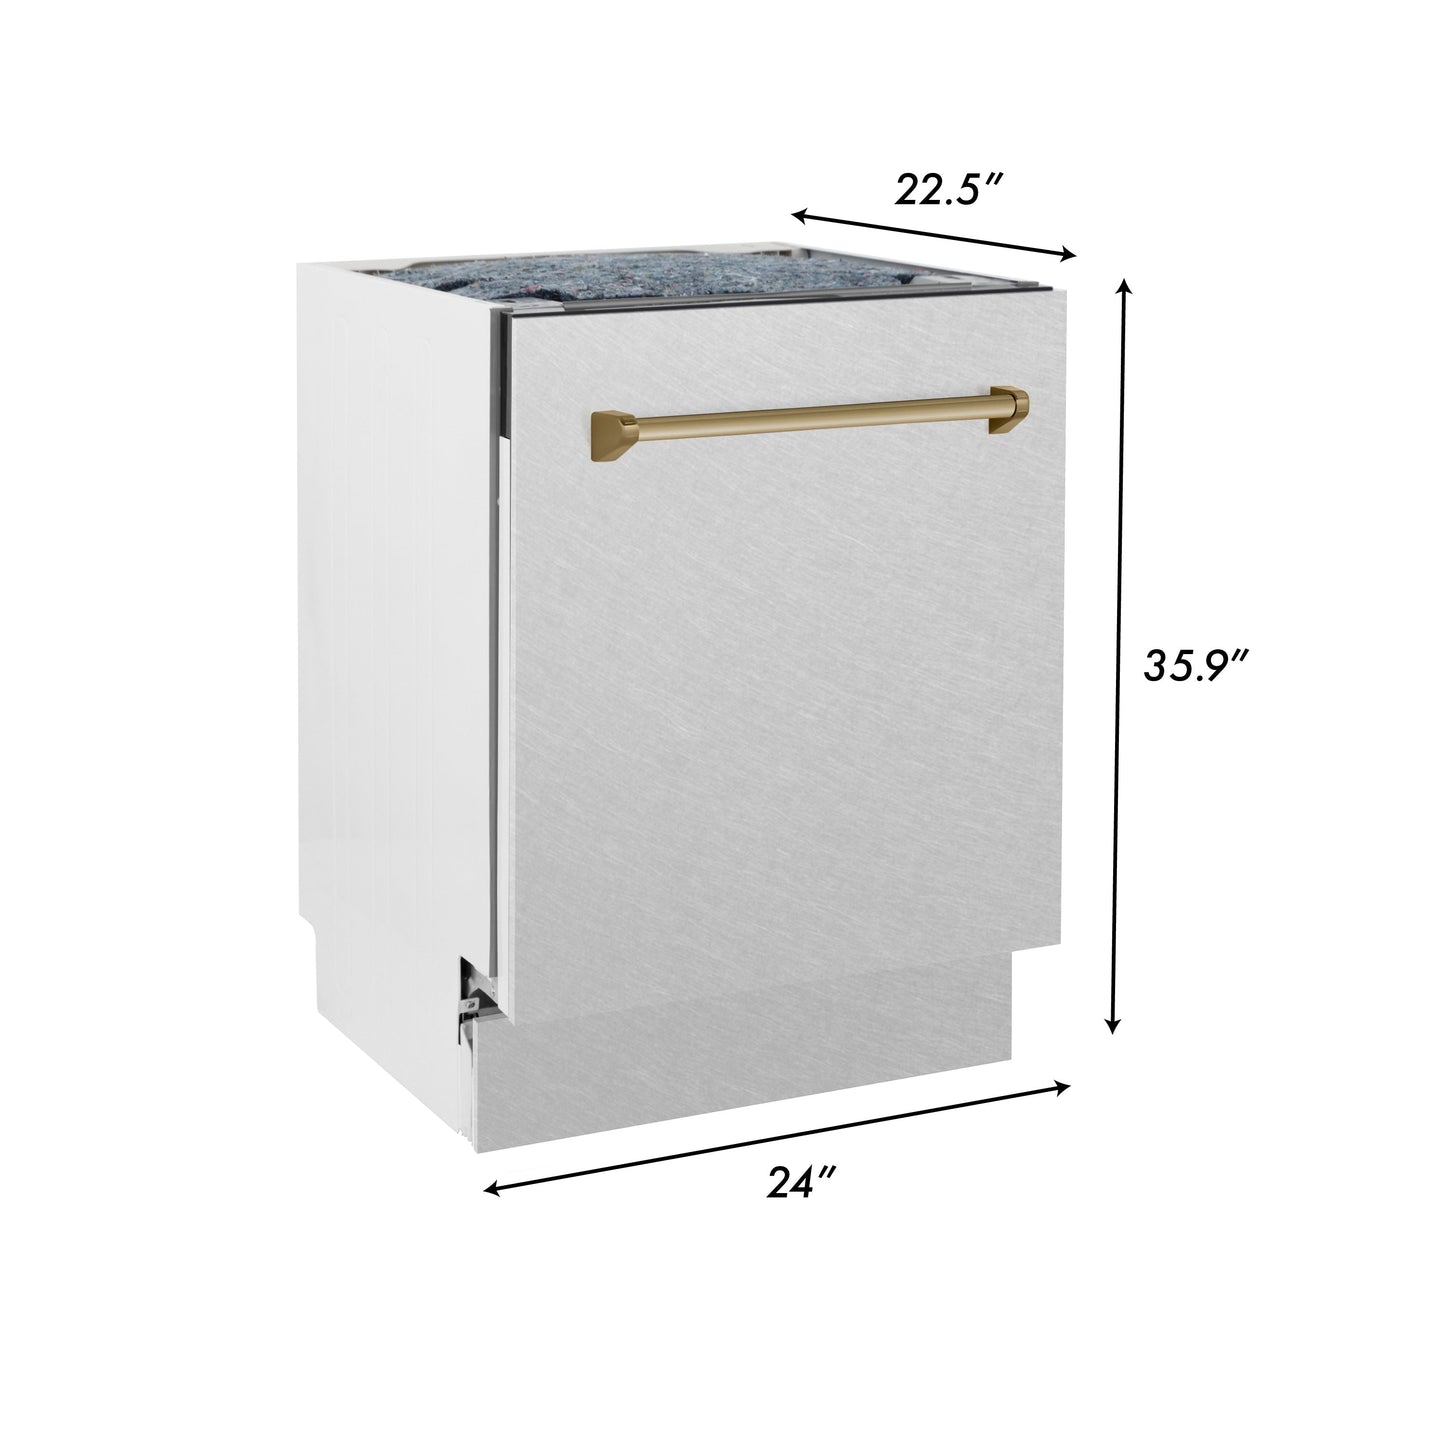 ZLINE Autograph Edition 24" DuraSnow Stainless Steel 3rd Rack Top Control Tall Tub Dishwasher with Champagne Bronze Handle